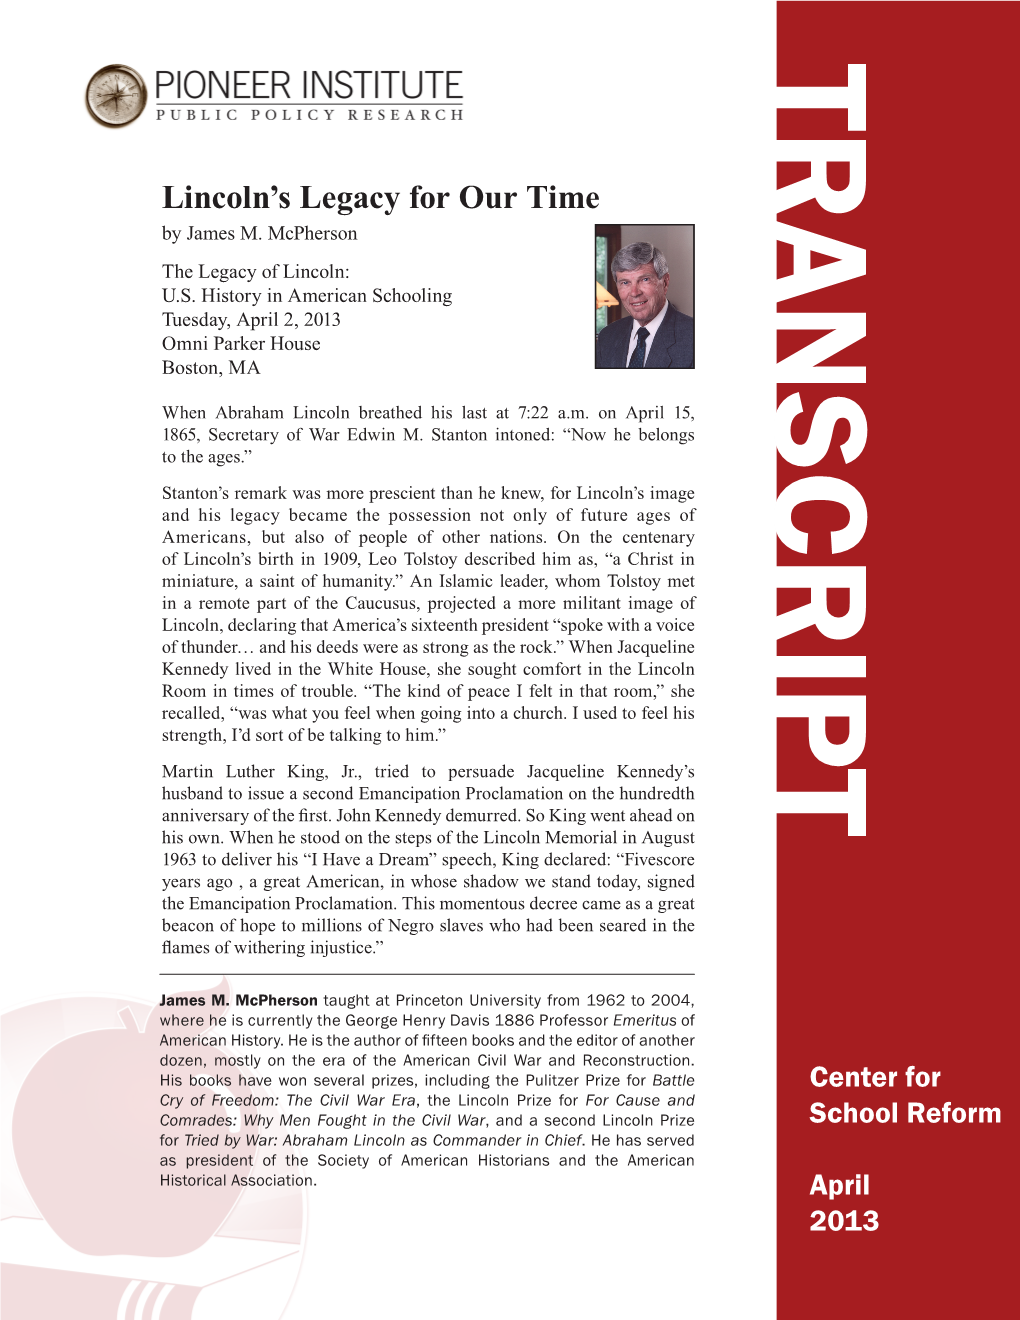 Lincoln's Legacy for Our Time: a Transcript Of